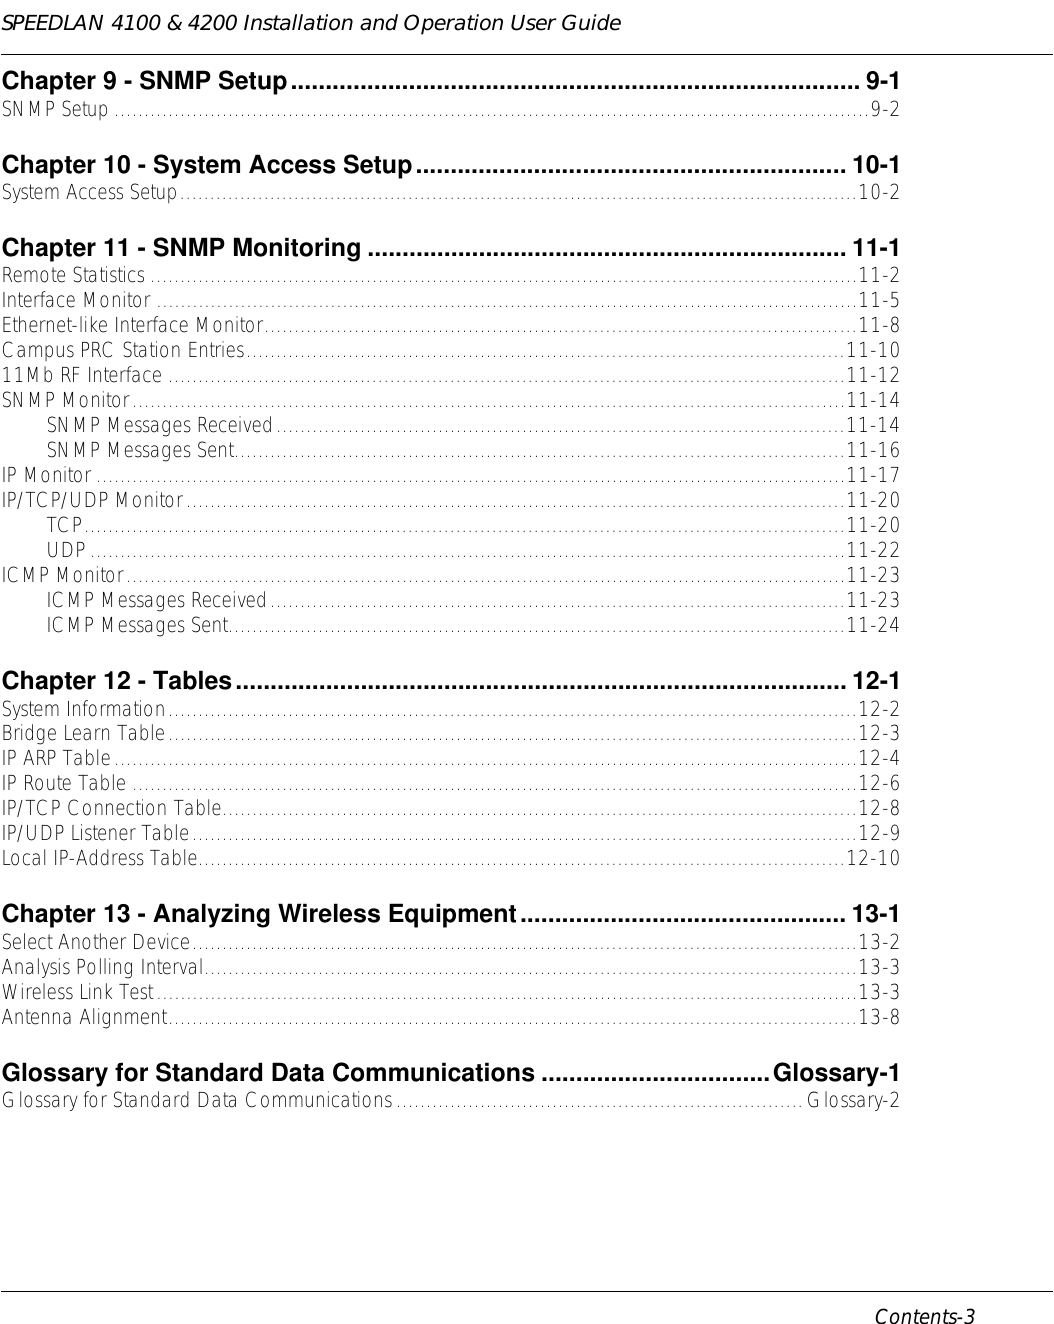 SPEEDLAN 4100 &amp; 4200 Installation and Operation User Guide      Contents-3                                                                                                                                                              Chapter 9 - SNMP Setup.................................................................................. 9-1SNMP Setup ..............................................................................................................................9-2Chapter 10 - System Access Setup.............................................................. 10-1System Access Setup.................................................................................................................10-2Chapter 11 - SNMP Monitoring ..................................................................... 11-1Remote Statistics ......................................................................................................................11-2Interface Monitor .....................................................................................................................11-5Ethernet-like Interface Monitor...................................................................................................11-8Campus PRC Station Entries....................................................................................................11-1011Mb RF Interface .................................................................................................................11-12SNMP Monitor.......................................................................................................................11-14SNMP Messages Received...............................................................................................11-14SNMP Messages Sent......................................................................................................11-16IP Monitor .............................................................................................................................11-17IP/TCP/UDP Monitor..............................................................................................................11-20TCP...............................................................................................................................11-20UDP..............................................................................................................................11-22ICMP Monitor........................................................................................................................11-23ICMP Messages Received................................................................................................11-23ICMP Messages Sent.......................................................................................................11-24Chapter 12 - Tables........................................................................................ 12-1System Information...................................................................................................................12-2Bridge Learn Table...................................................................................................................12-3IP ARP Table............................................................................................................................12-4IP Route Table .........................................................................................................................12-6IP/TCP Connection Table..........................................................................................................12-8IP/UDP Listener Table...............................................................................................................12-9Local IP-Address Table............................................................................................................12-10Chapter 13 - Analyzing Wireless Equipment............................................... 13-1Select Another Device...............................................................................................................13-2Analysis Polling Interval.............................................................................................................13-3Wireless Link Test.....................................................................................................................13-3Antenna Alignment...................................................................................................................13-8Glossary for Standard Data Communications .................................Glossary-1Glossary for Standard Data Communications....................................................................Glossary-2